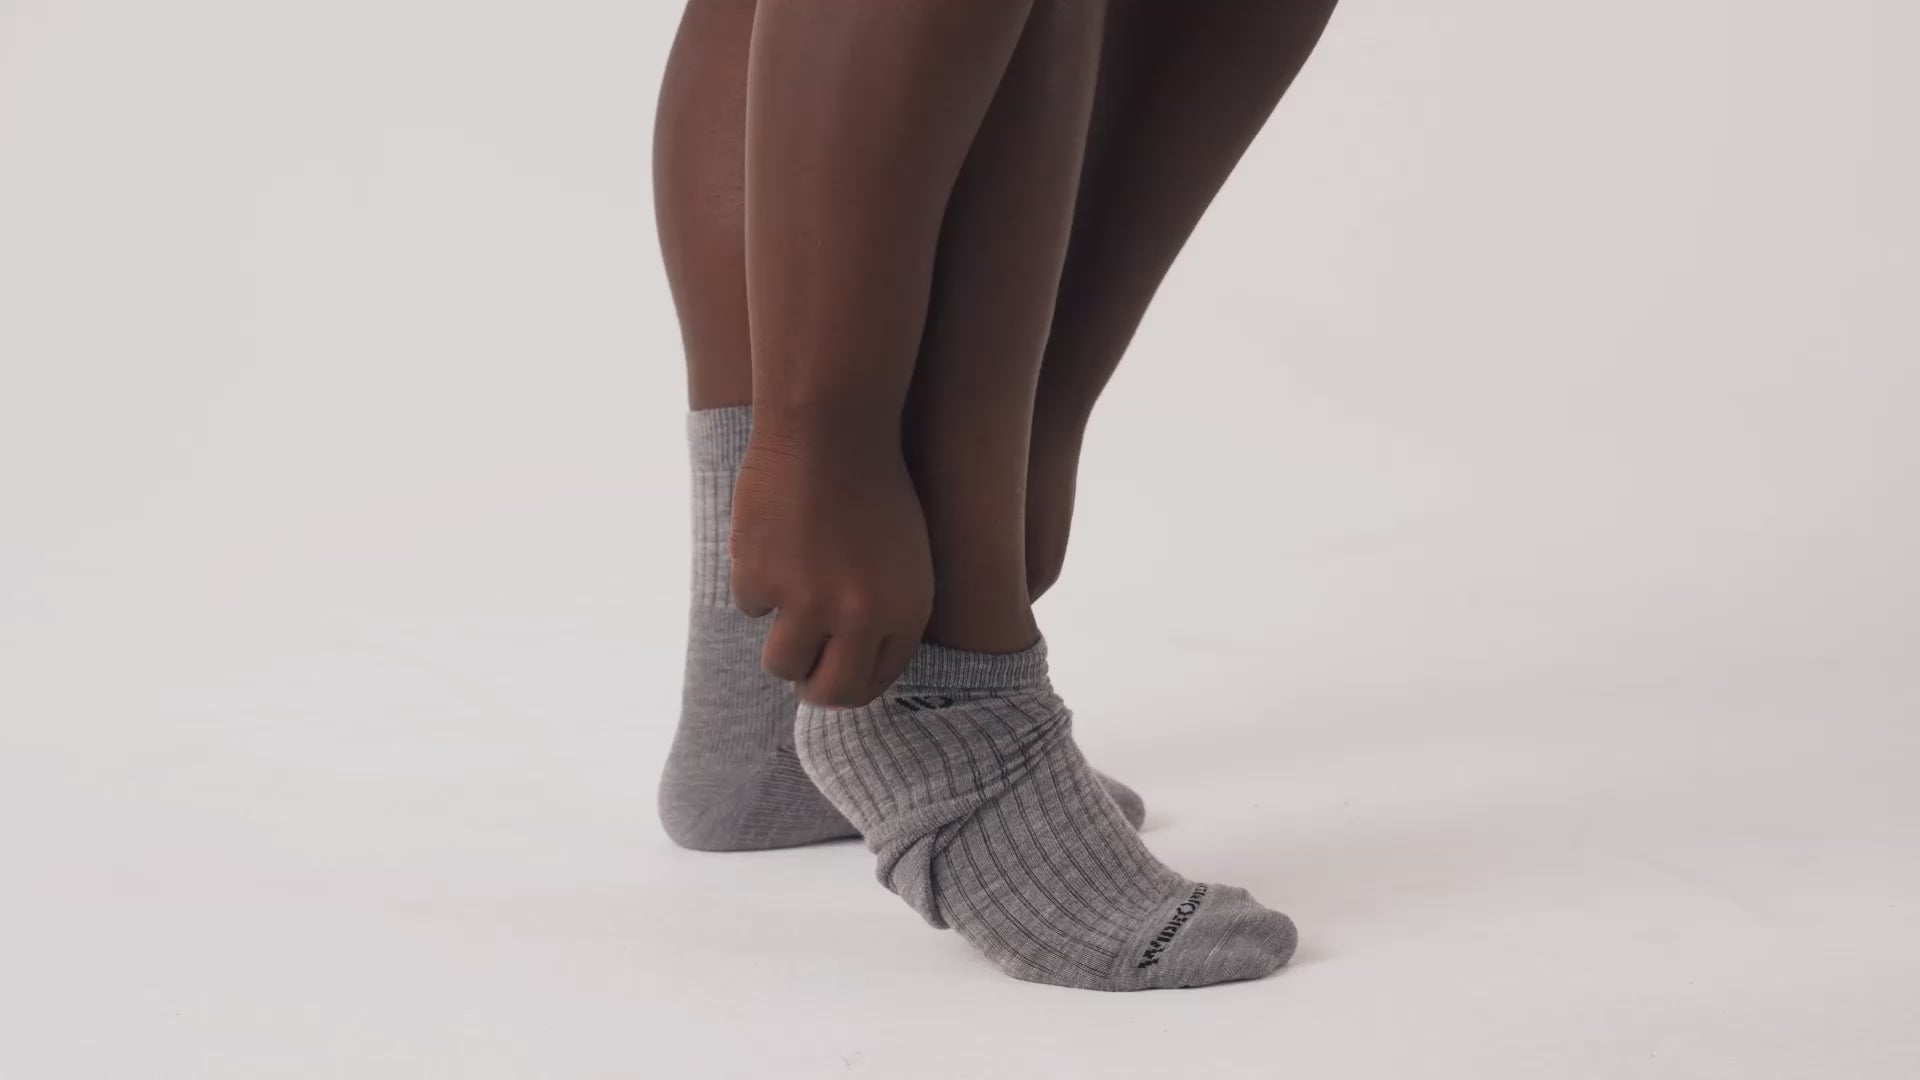 Model putting on, adjusting and standing in WIDE OPEN socks.